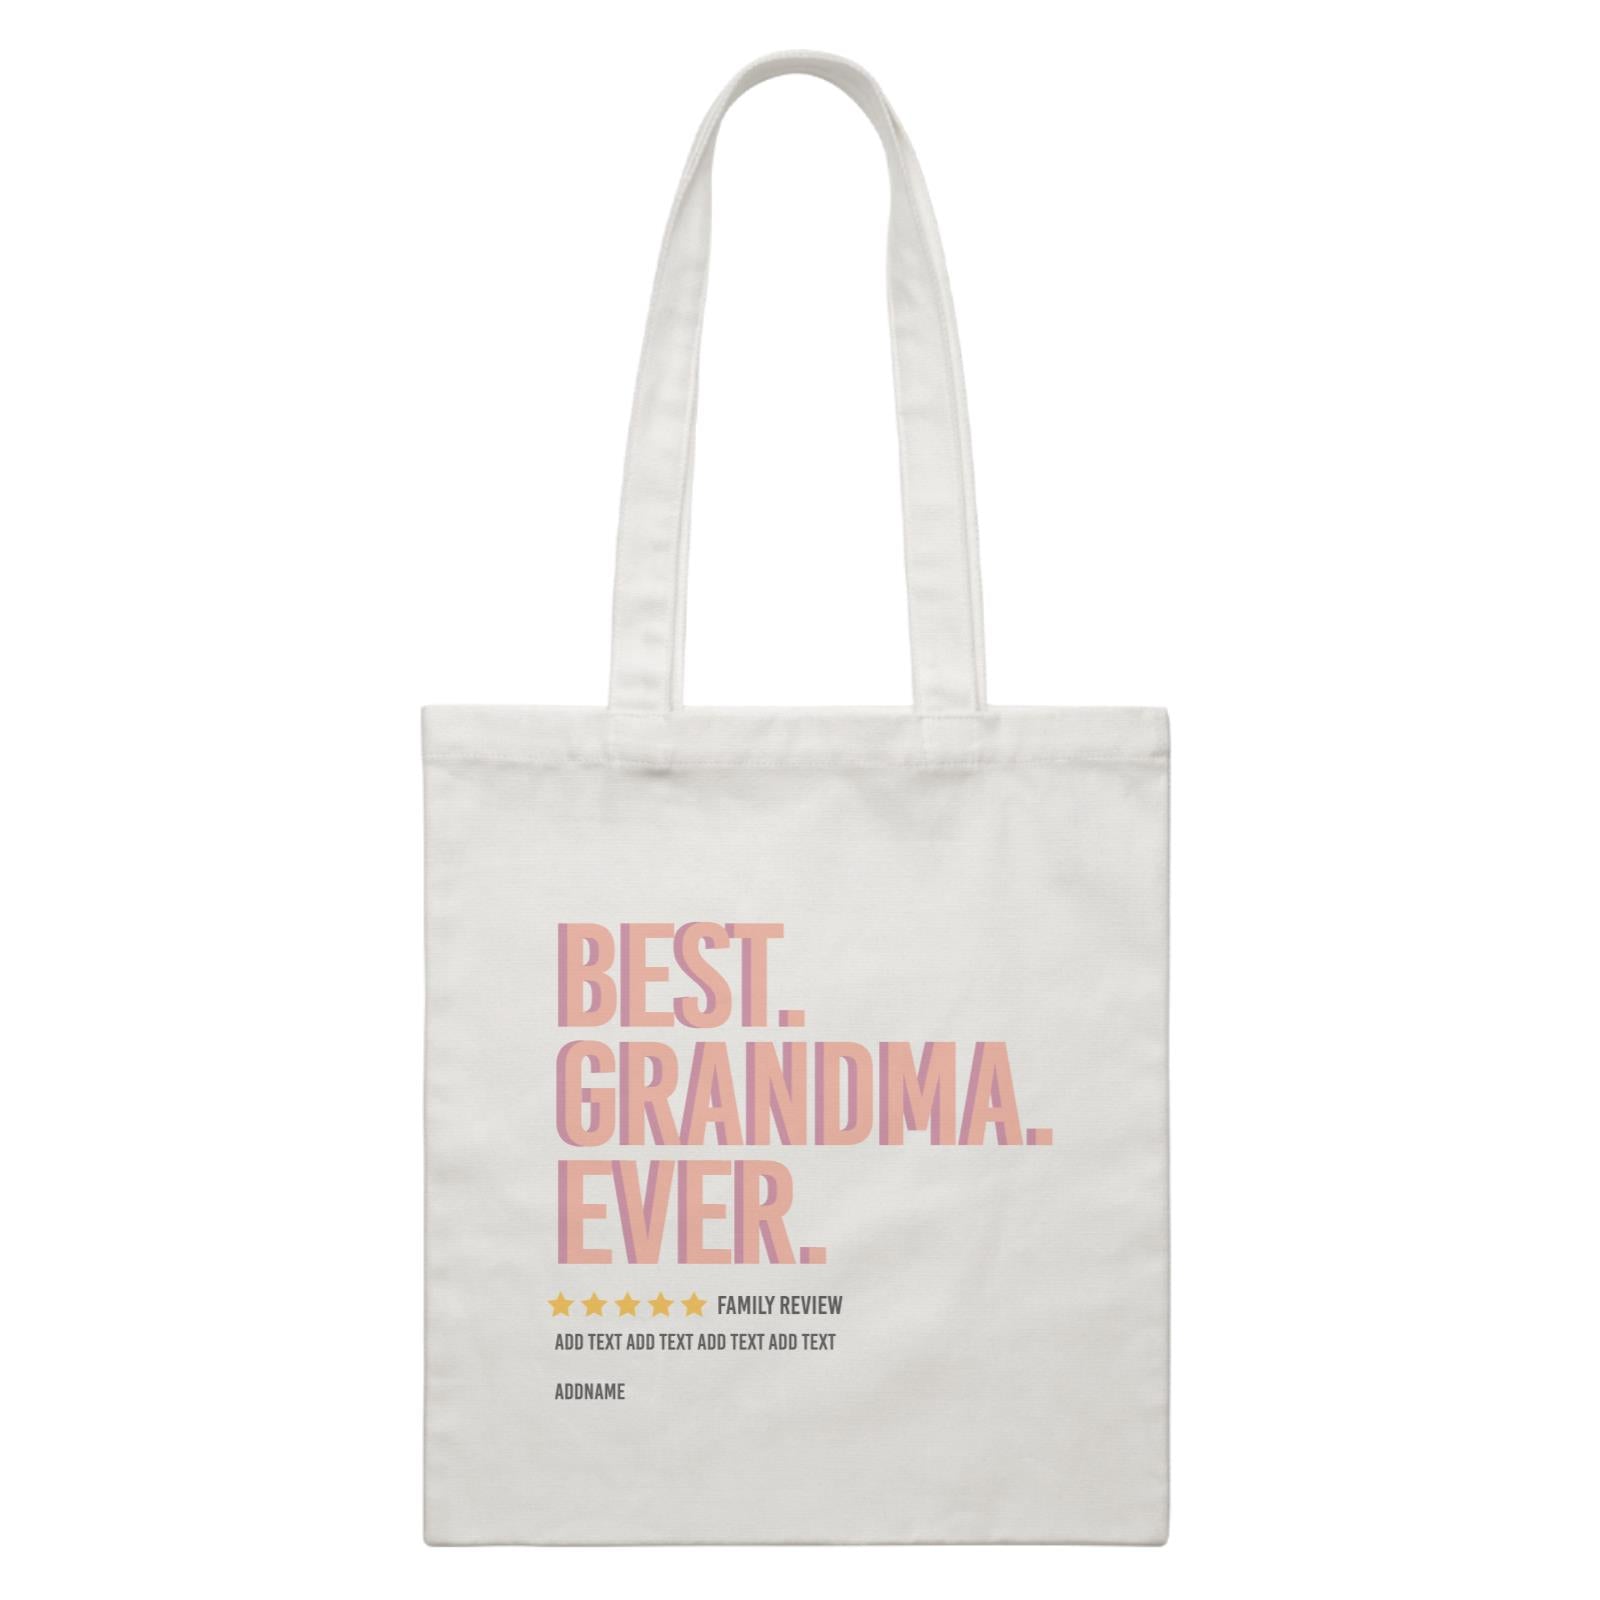 Awesome Mom 1 Best Grandma Ever Family Review Add Text And Addname White Canvas Bag